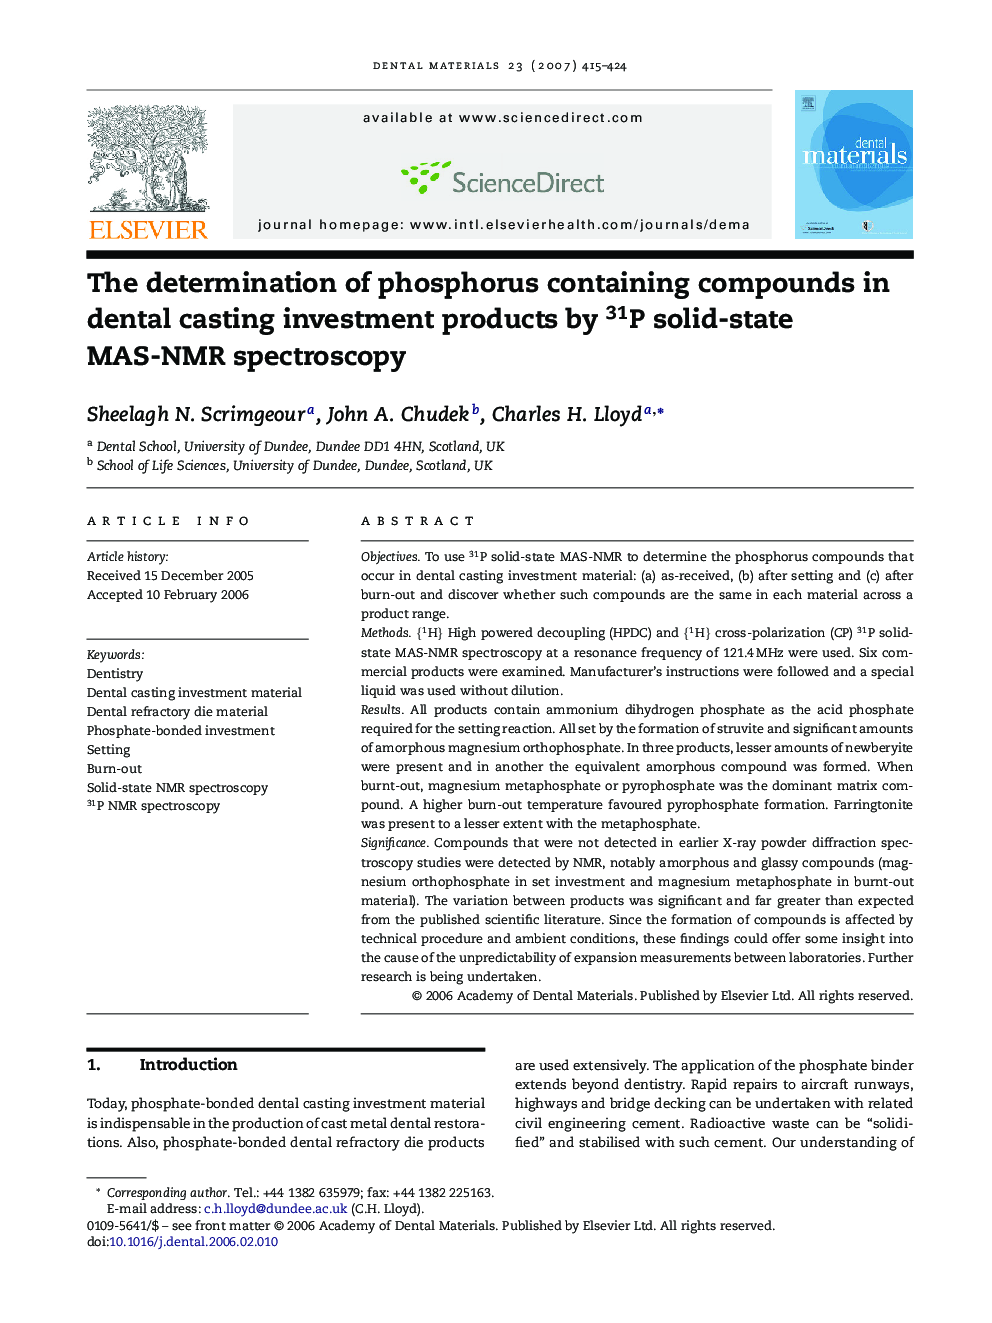 The determination of phosphorus containing compounds in dental casting investment products by 31P solid-state MAS-NMR spectroscopy